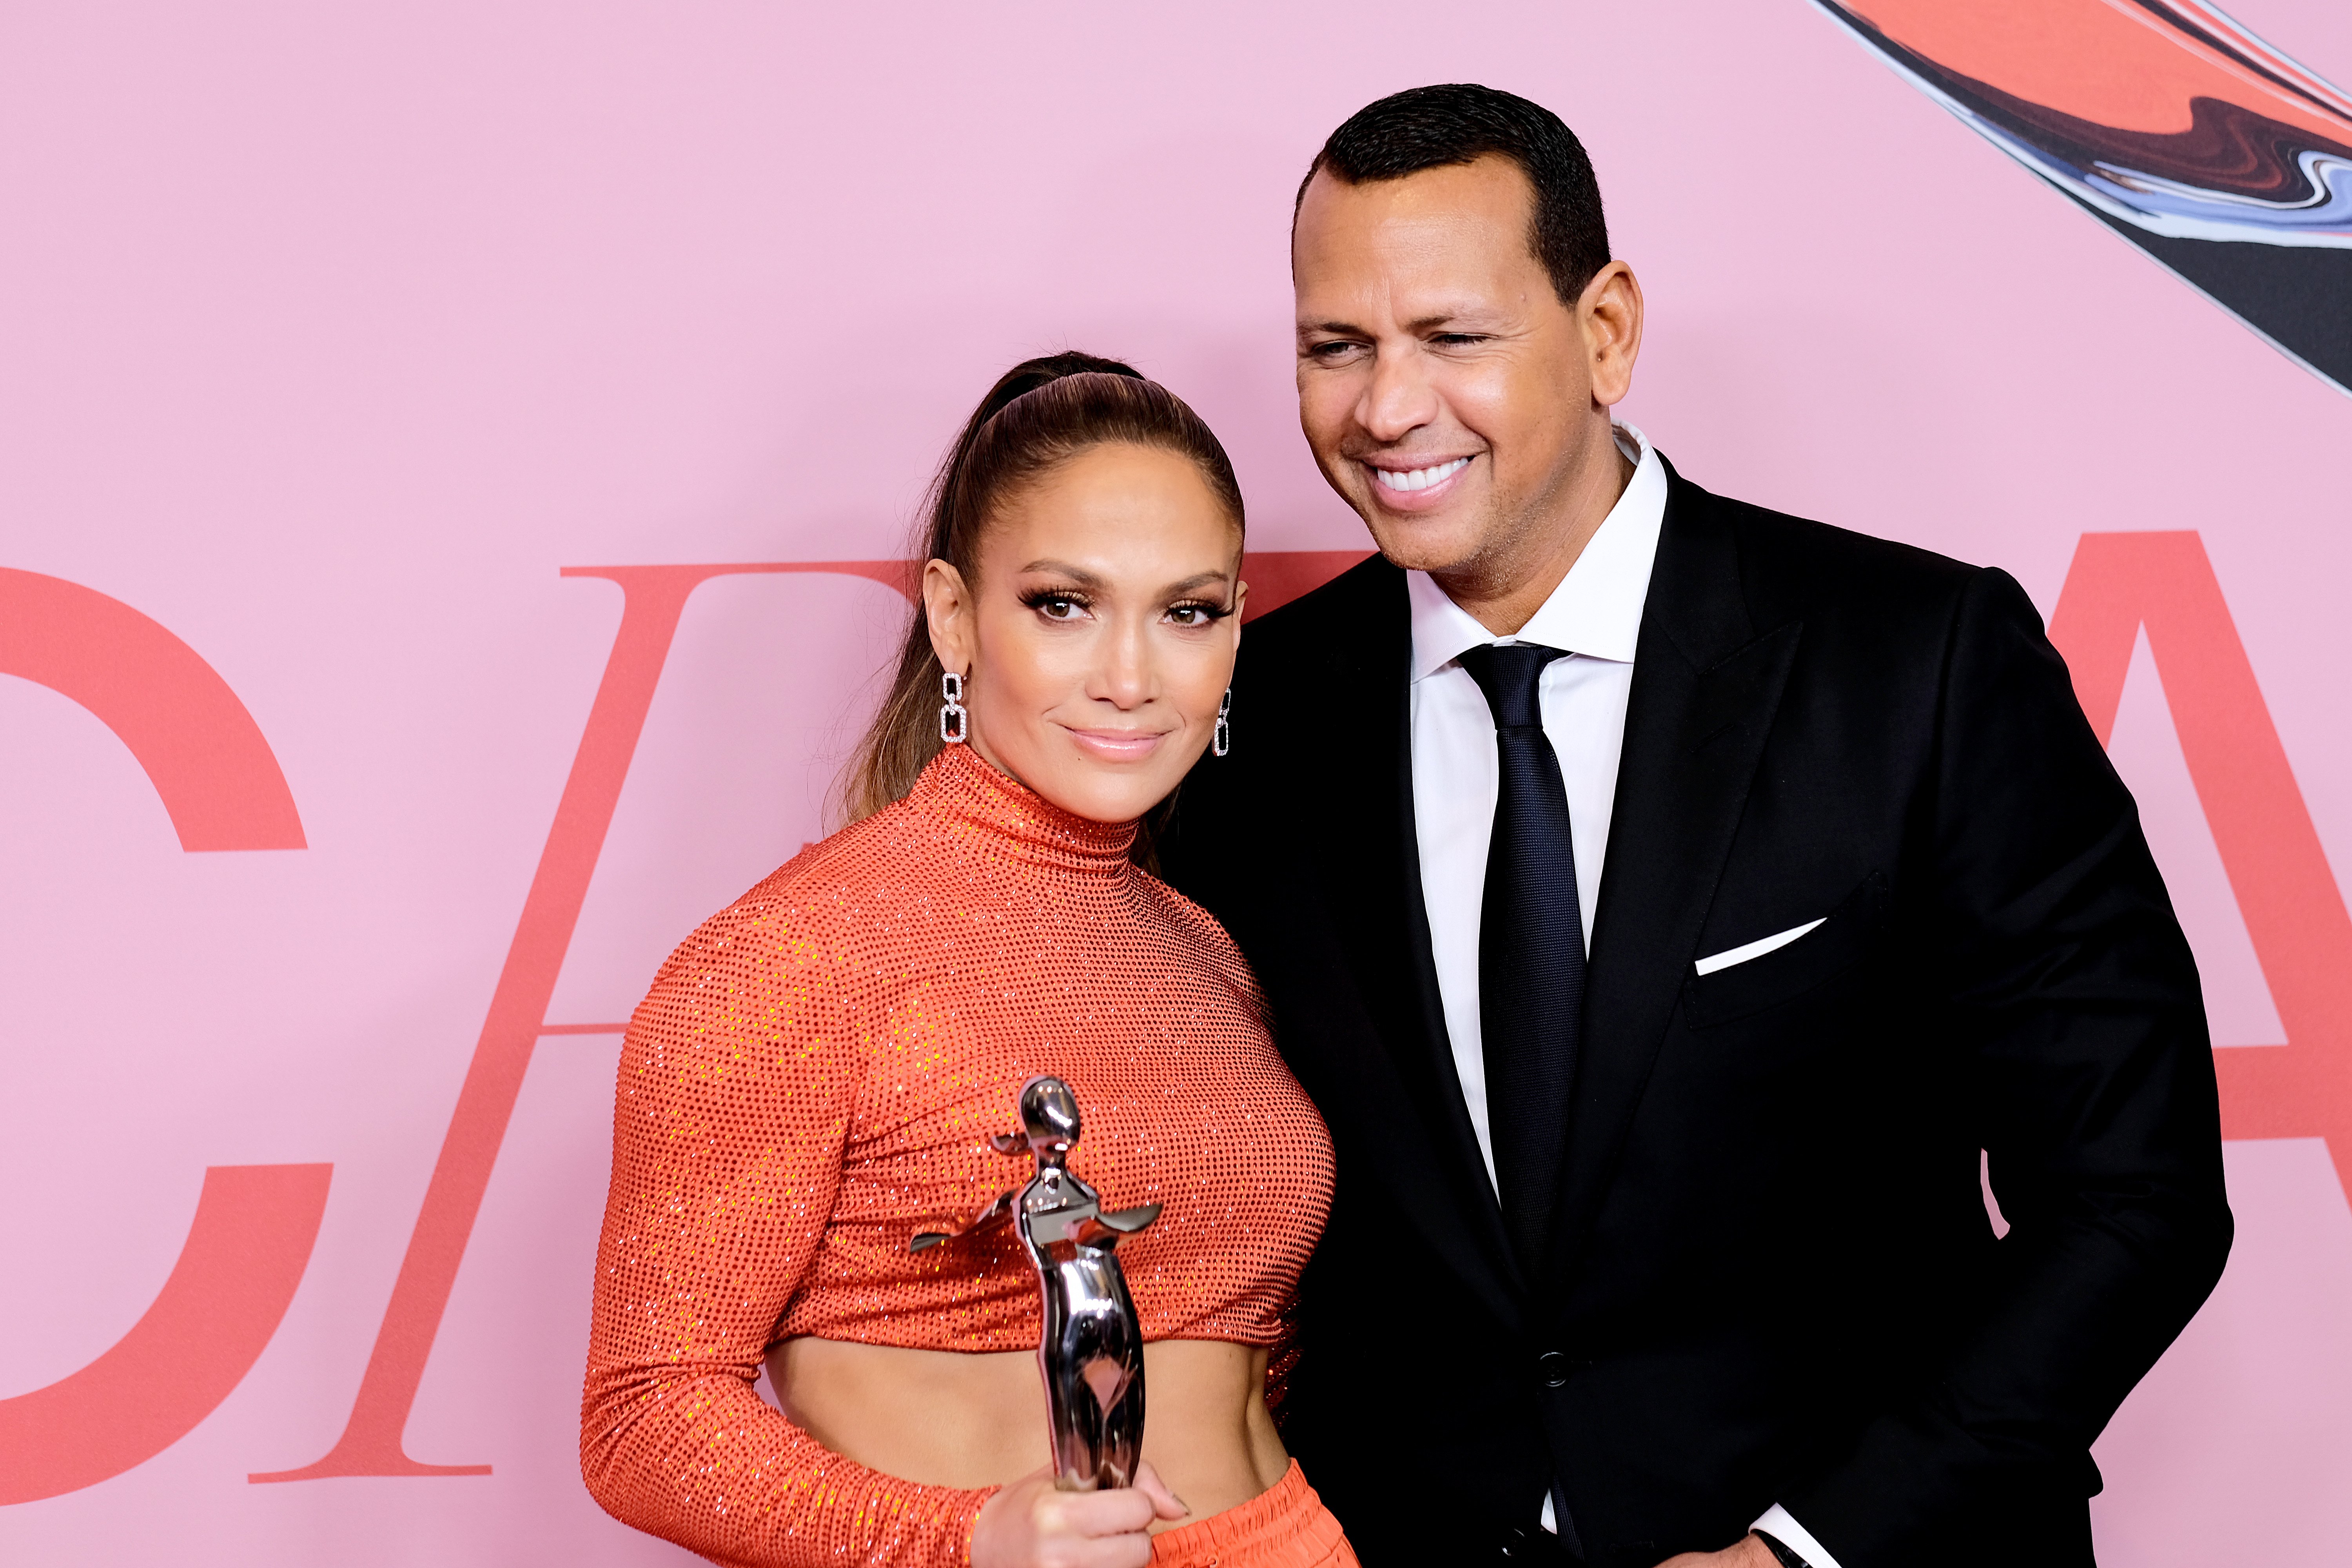 Jennifer Lopez poses with the Fashion Icon Award and Alex Rodriguez during Winners Walk during the CFDA Fashion Awards at the Brooklyn Museum of Art on June 03, 2019 in New York City | Photo: Getty Images